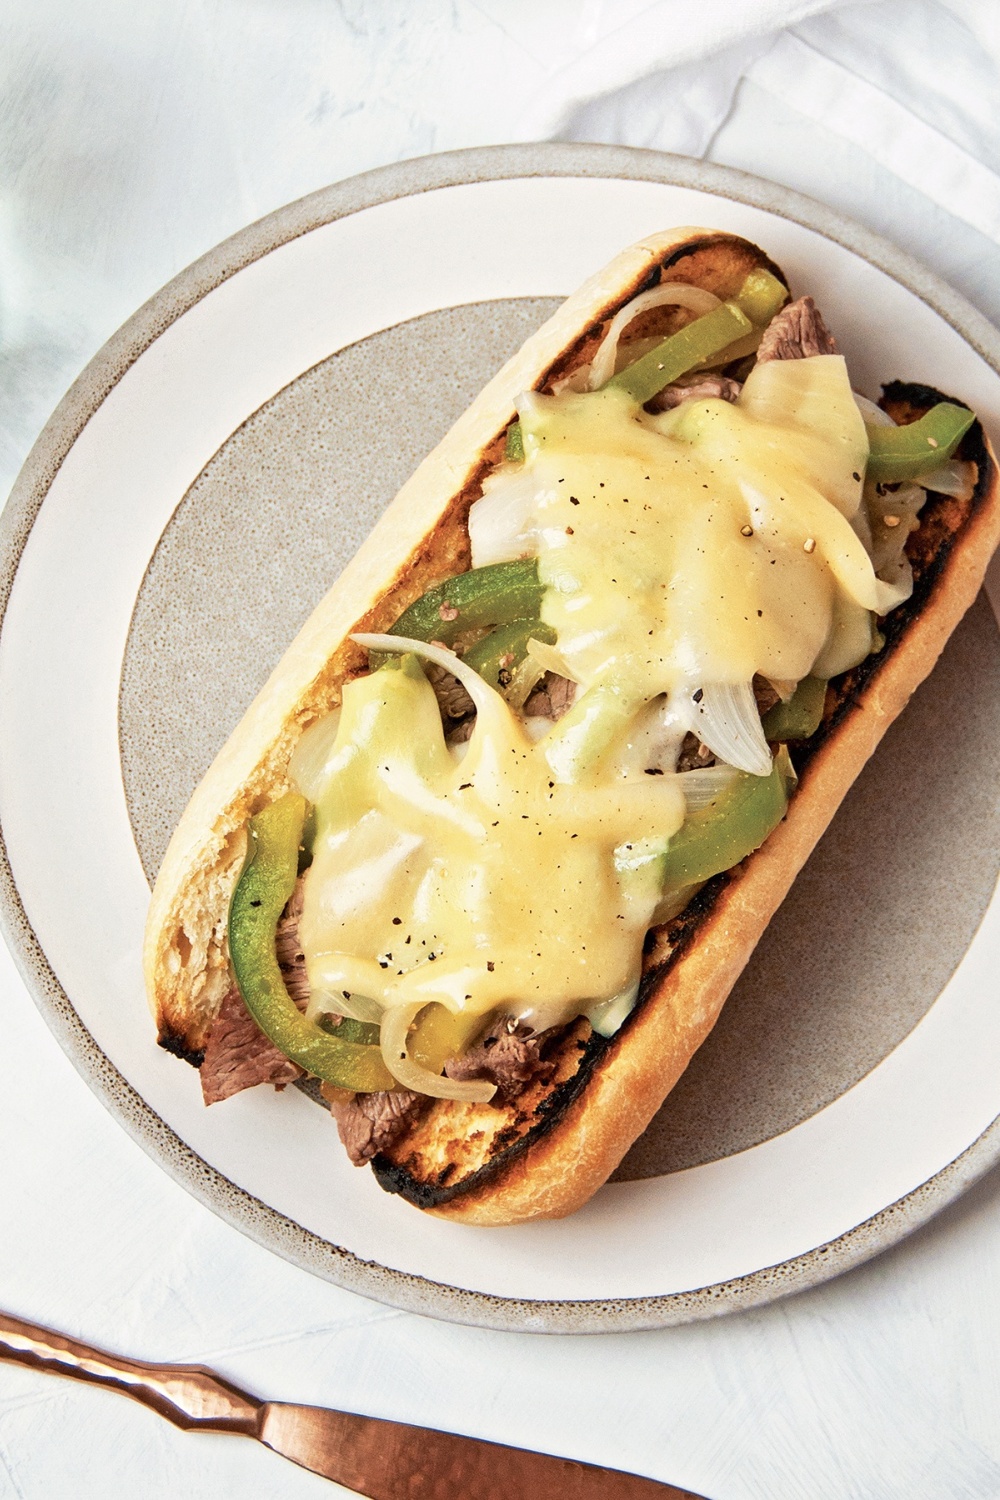 Slow Cooker Philly Cheesesteak